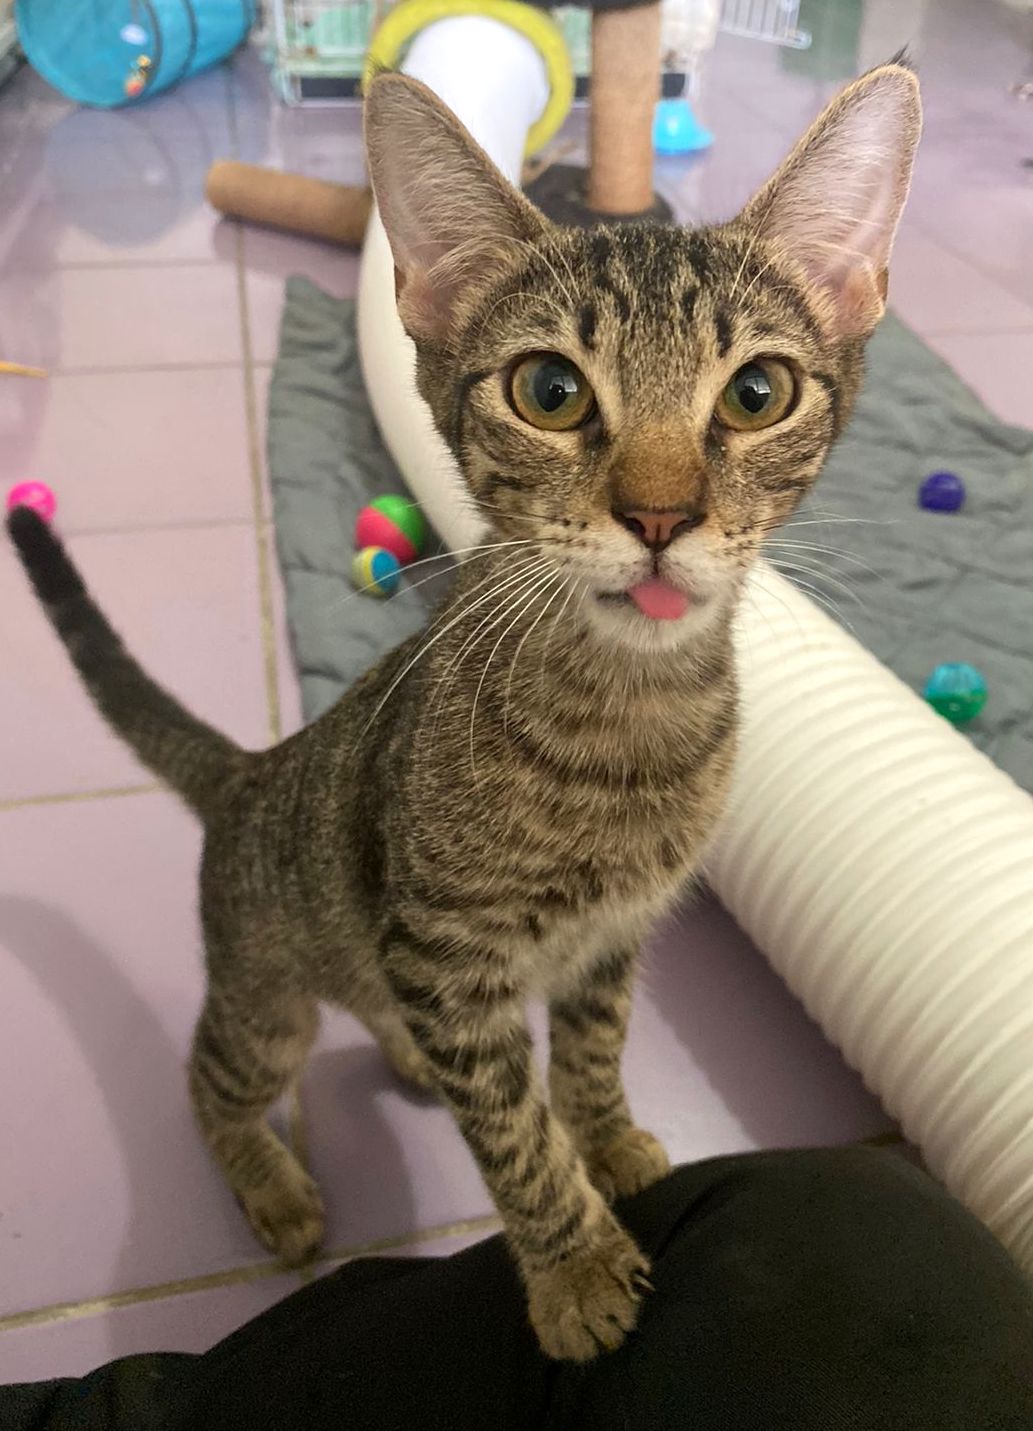 Silly Goose is a gray tabby with big beautiful eyes.